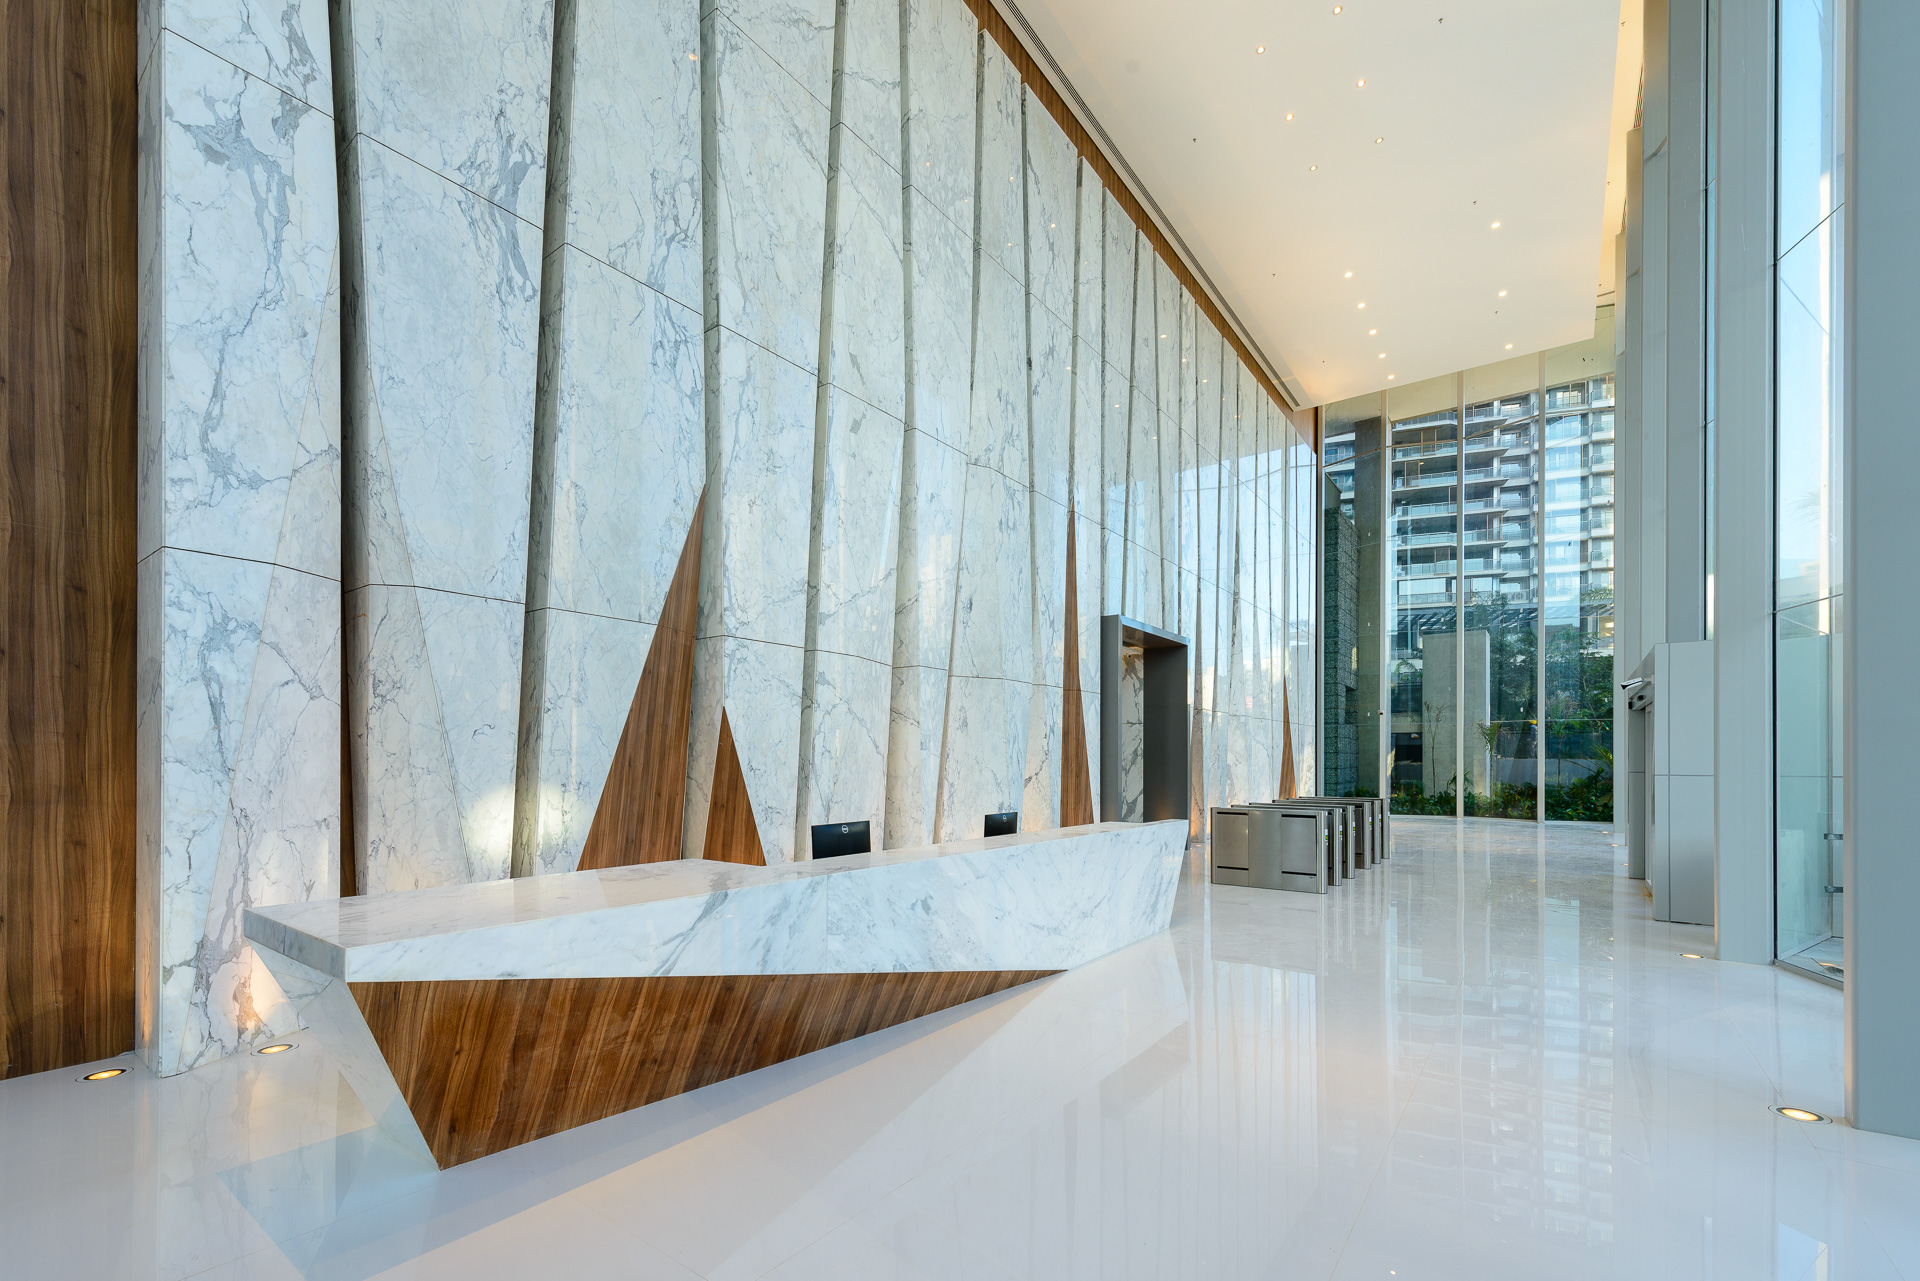 O Parque lobby view with granite walls and modern finishes